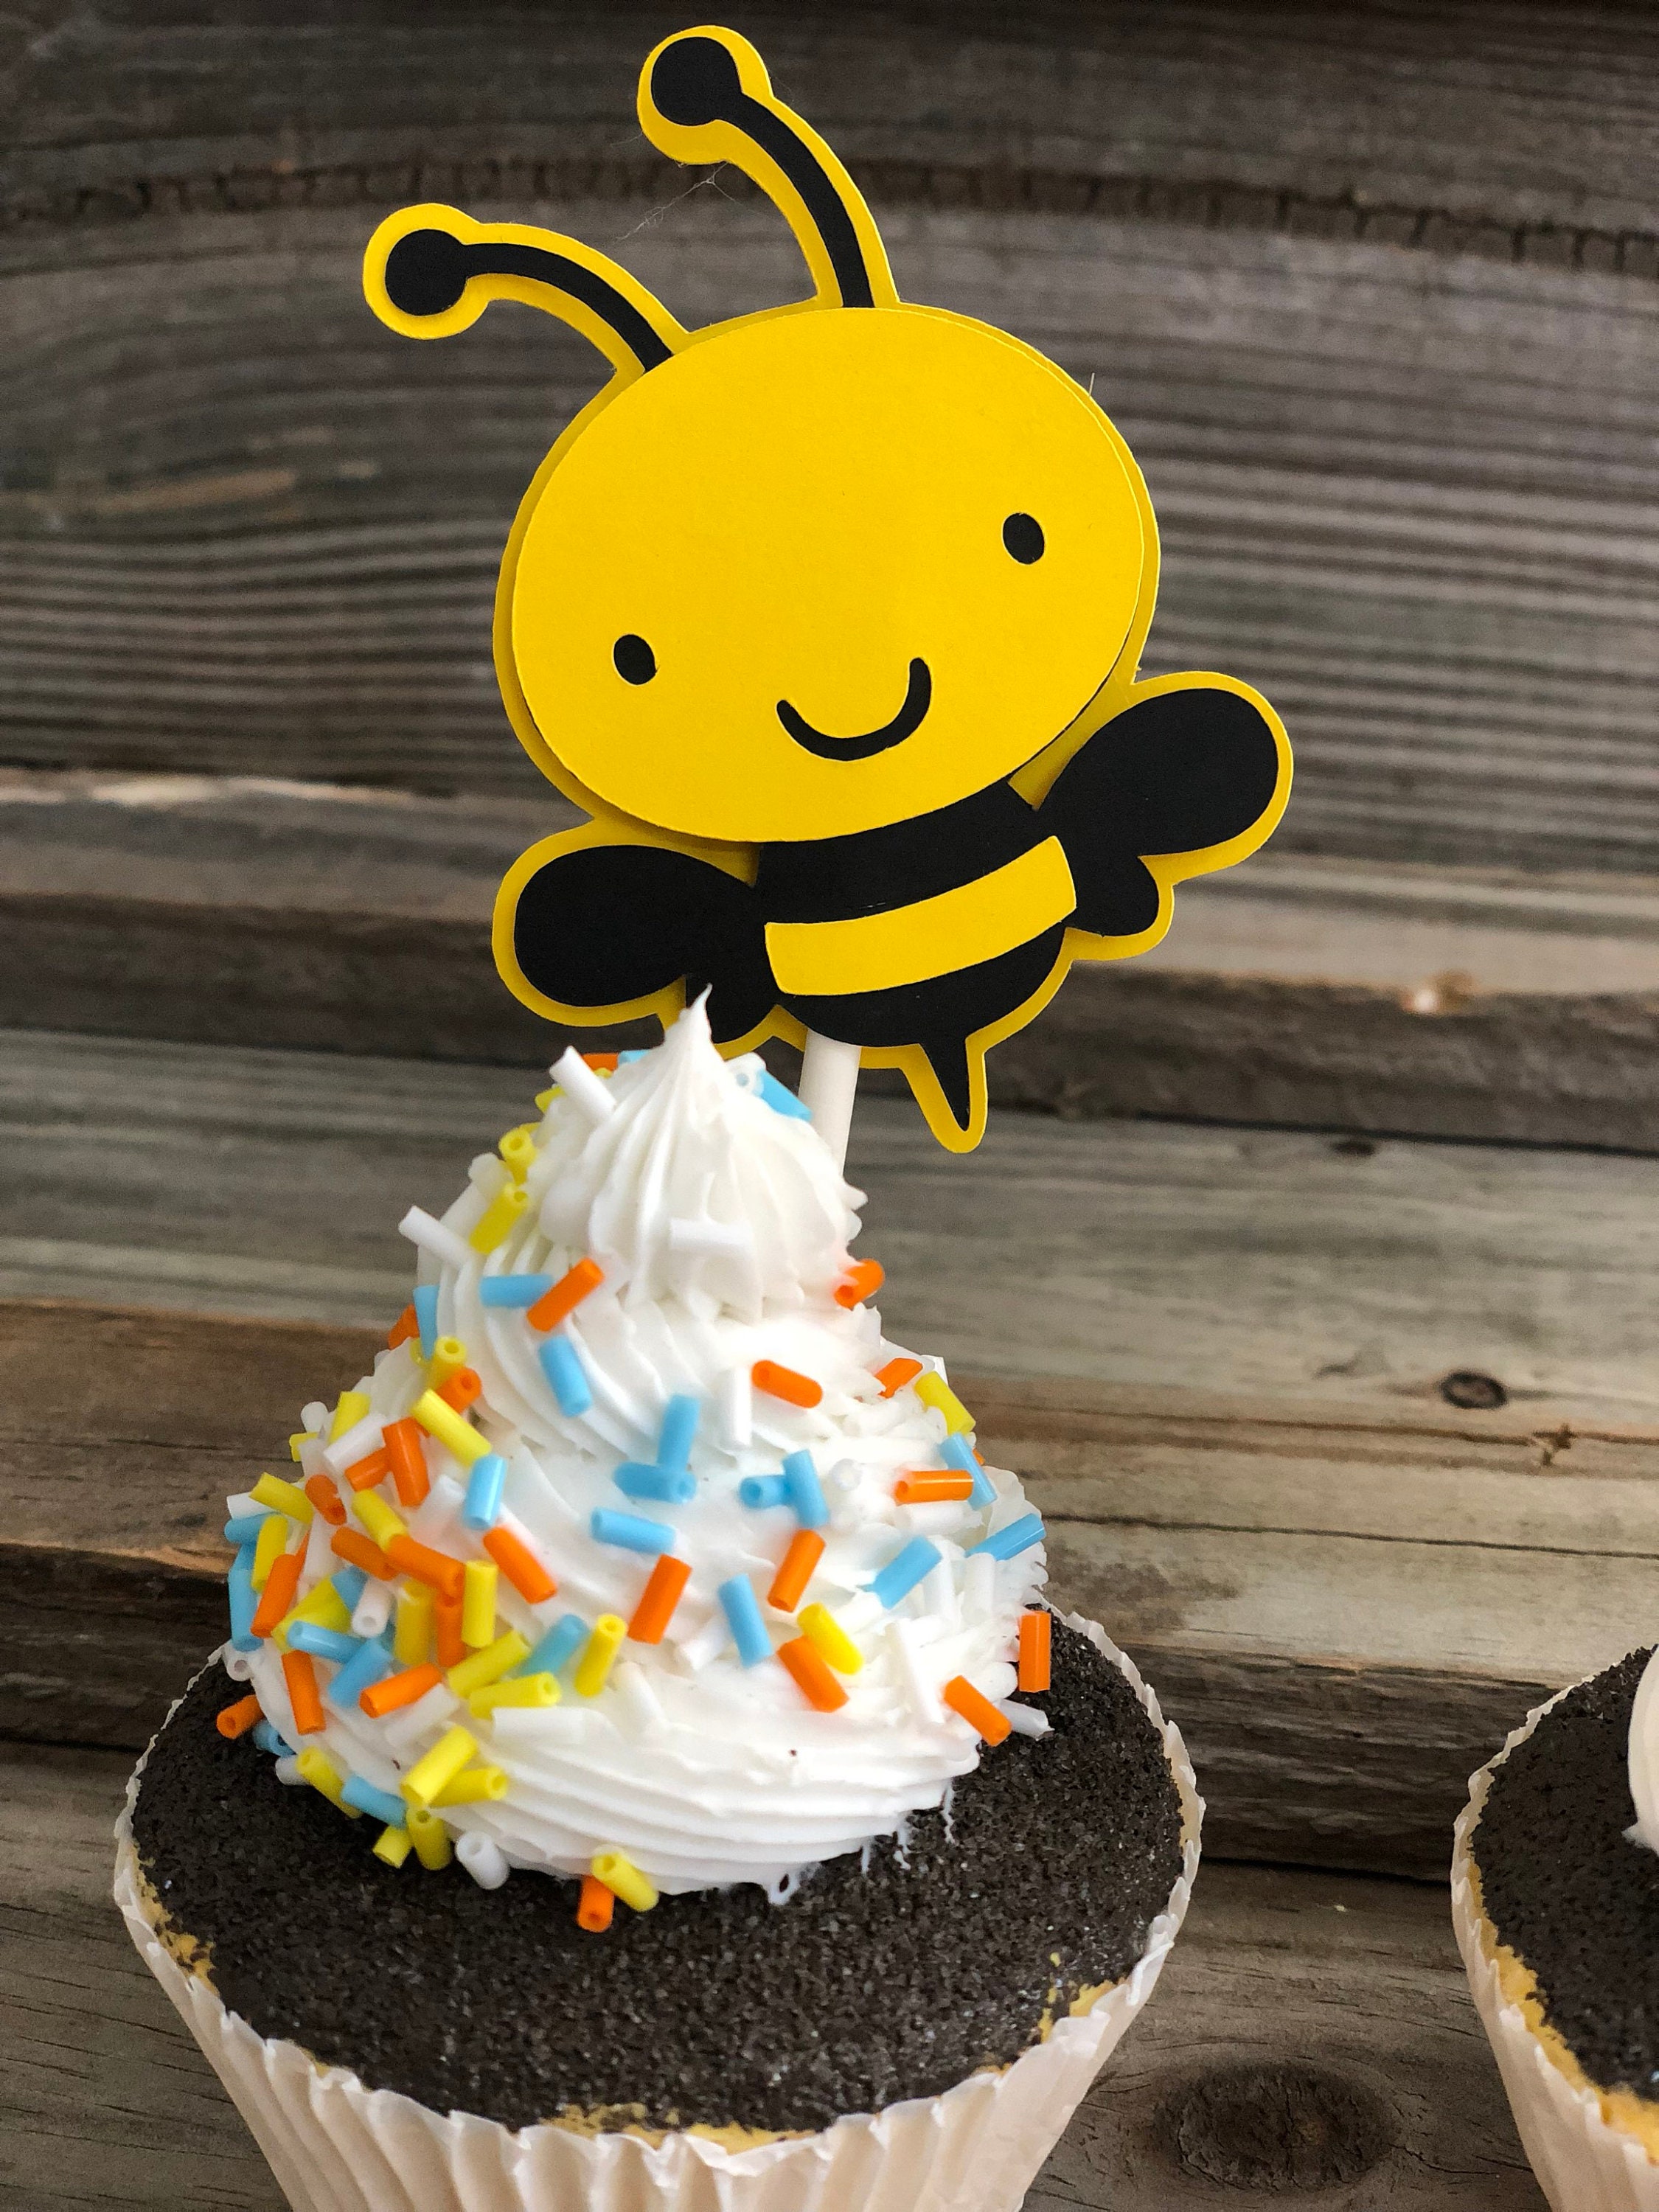 Set of 12 - Yellow and Black BUMBLE BEE Cupcake Toppers - Baby  Shower/Birthday Party - Decorations/Favors/Centerpiece - Boy/Girl